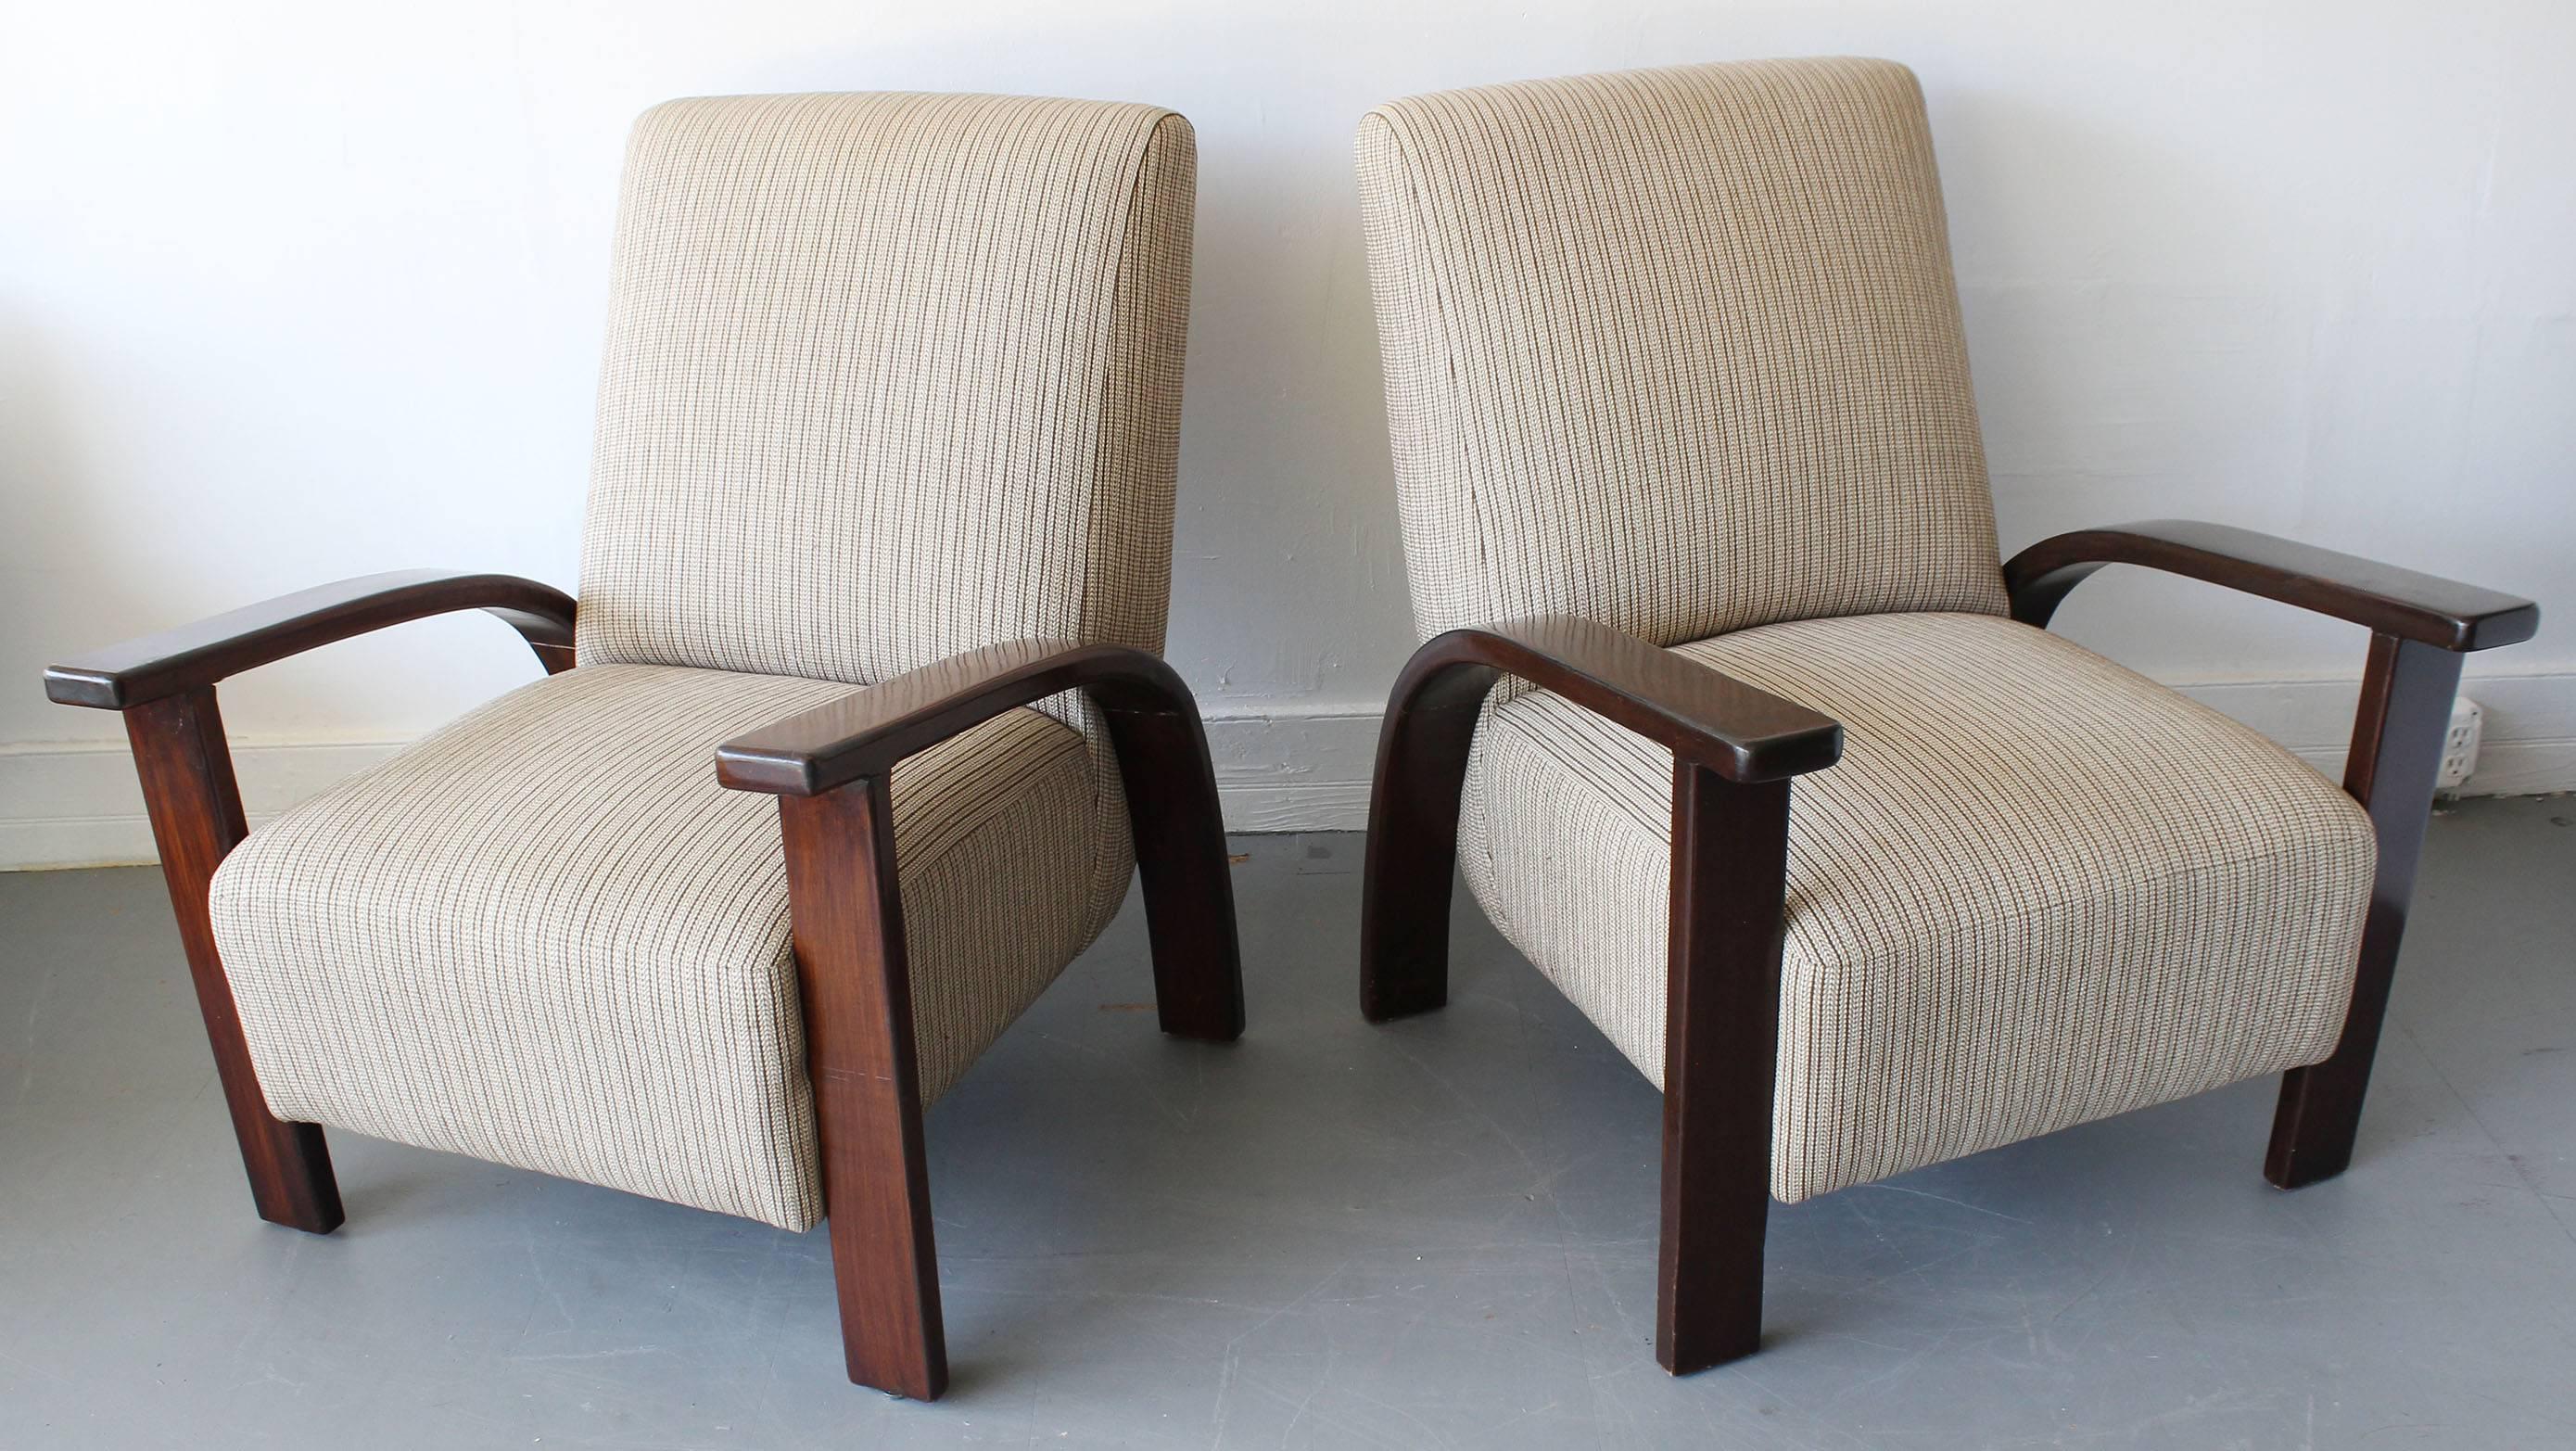 A handsome pair of bentwood mahogany French deco armchairs, upholstered in striped blend fabric.
 